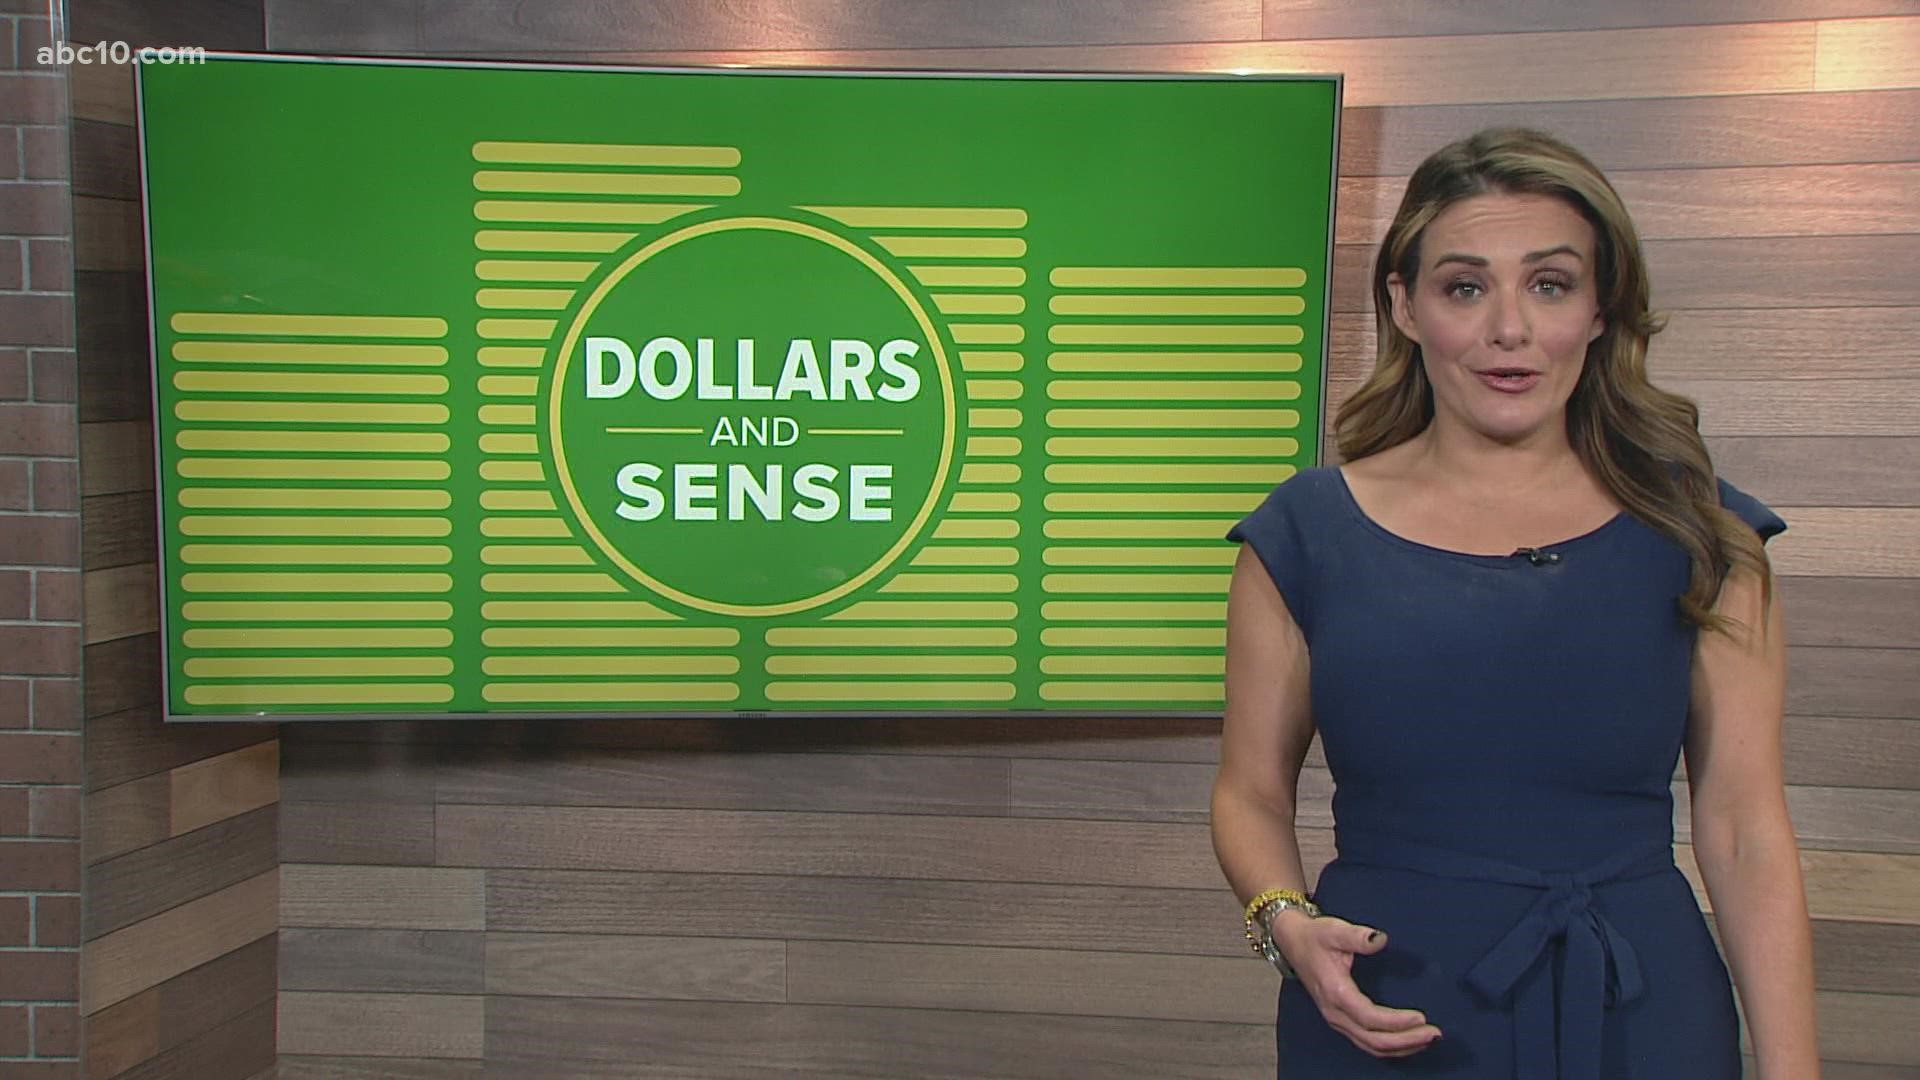 ABC10's Brittany Begley gives us the rundown about saving money with gas and groceries.